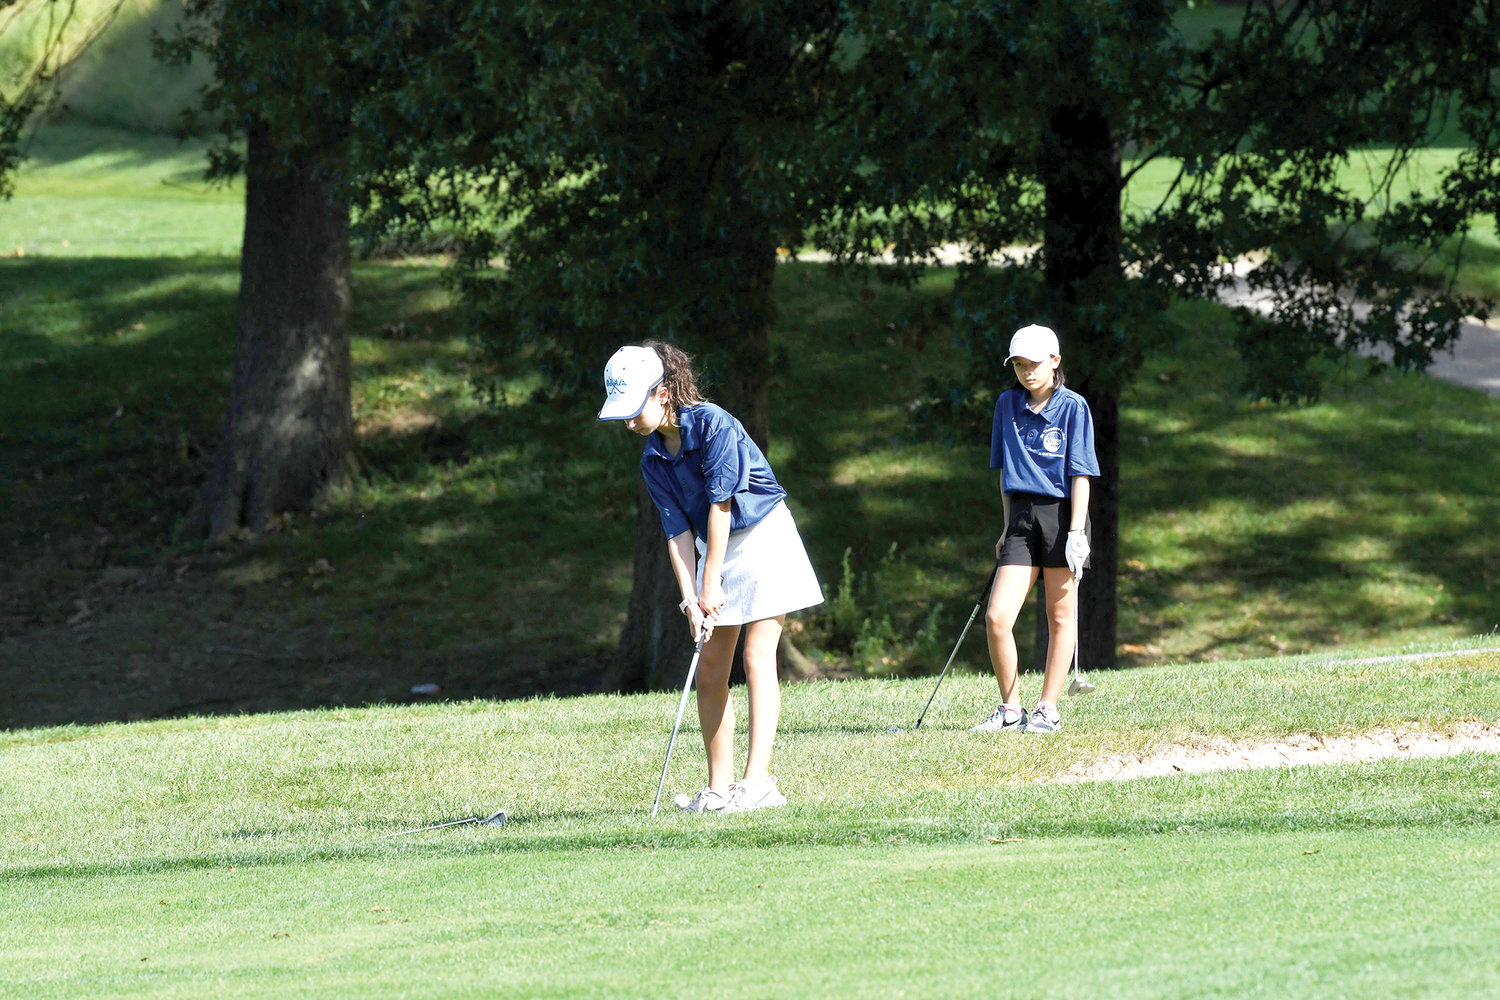 Isabella Sheikowitz chips to the second hole during the Dr. Theodore A. Atlas CYO Junior Golf Tournament at Silver Lake Golf Course on Staten Island Sept. 3. Watching her was Abby Garcia, who was the overall girls winner at the tournament.